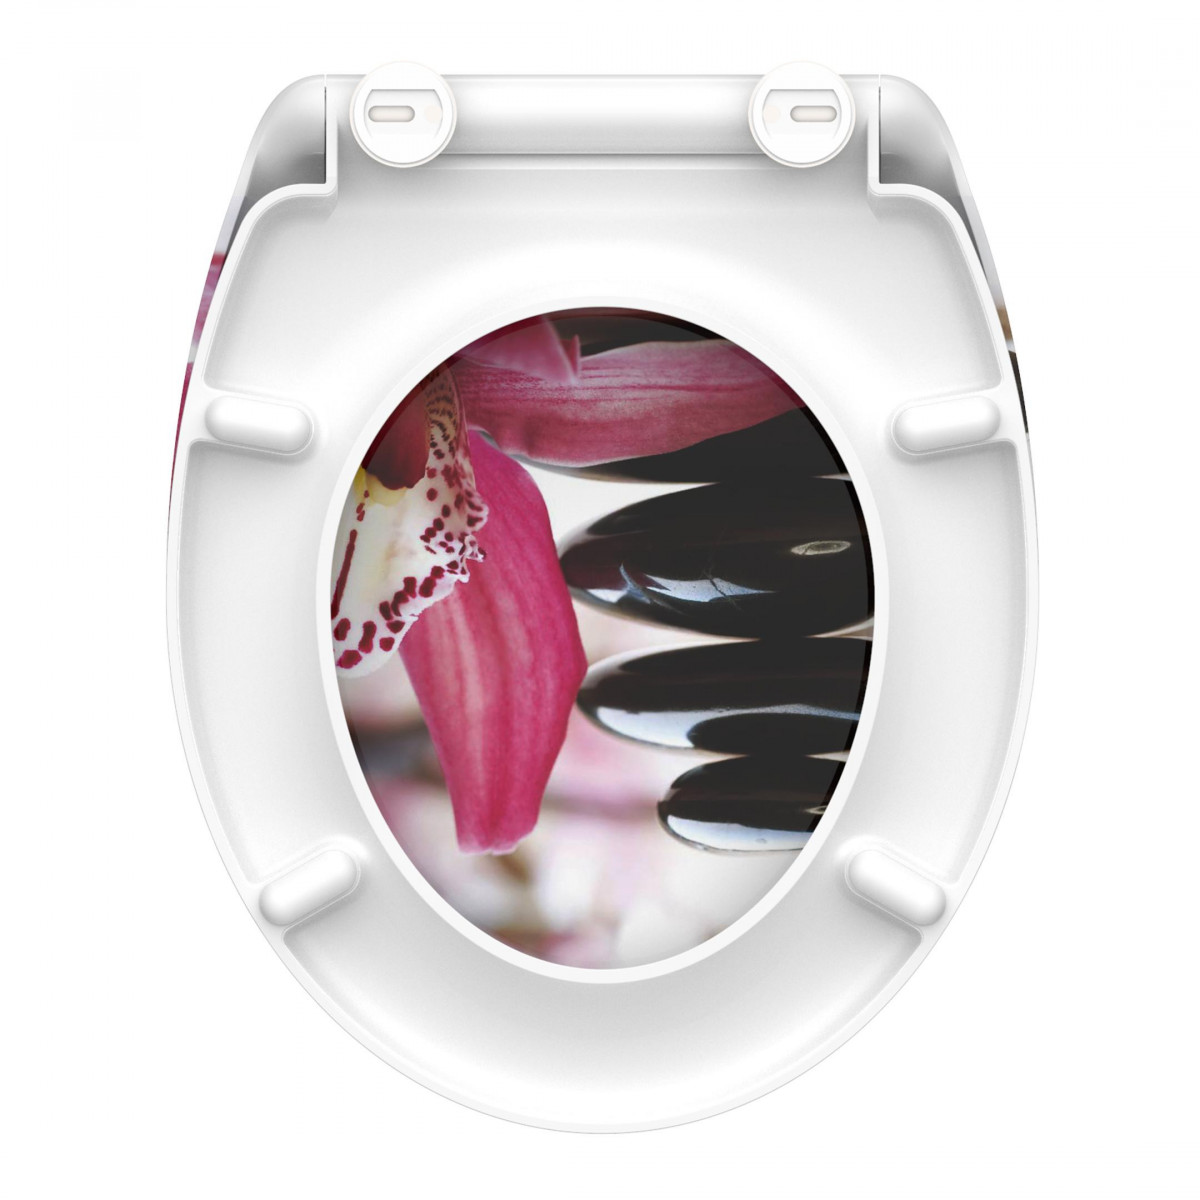 Duroplast Toilet Seat WELLYNESS with Soft Close and Quick Release